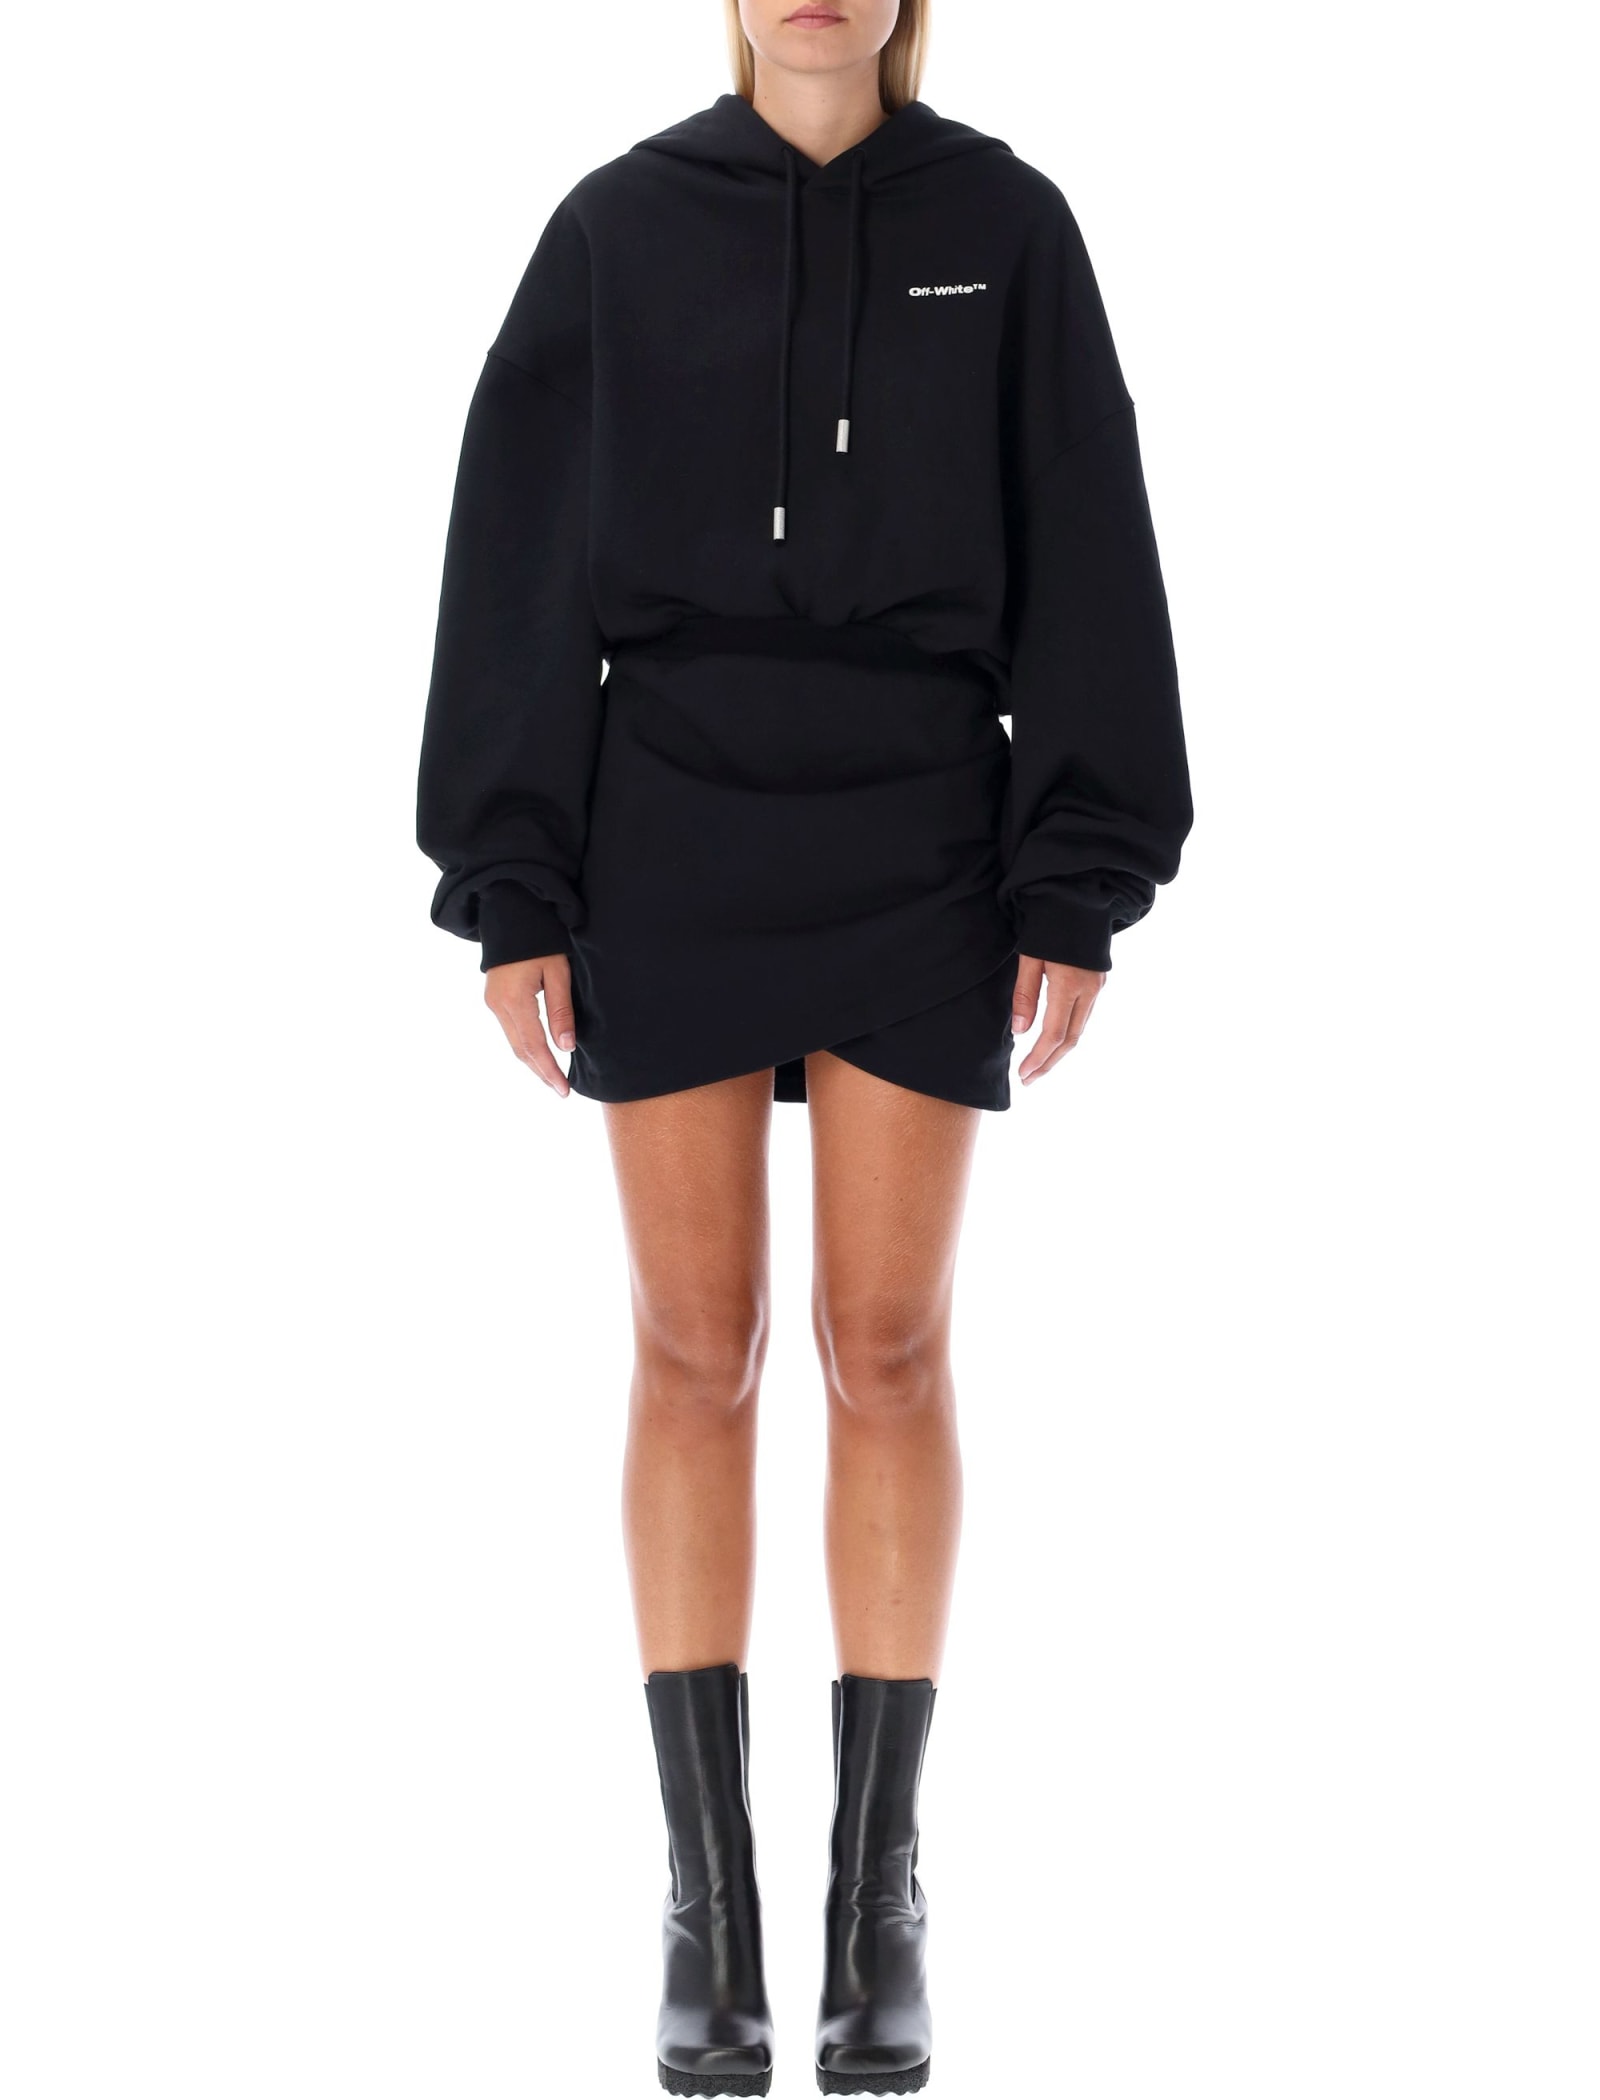 Off-White For All Hoodie Sweatdress